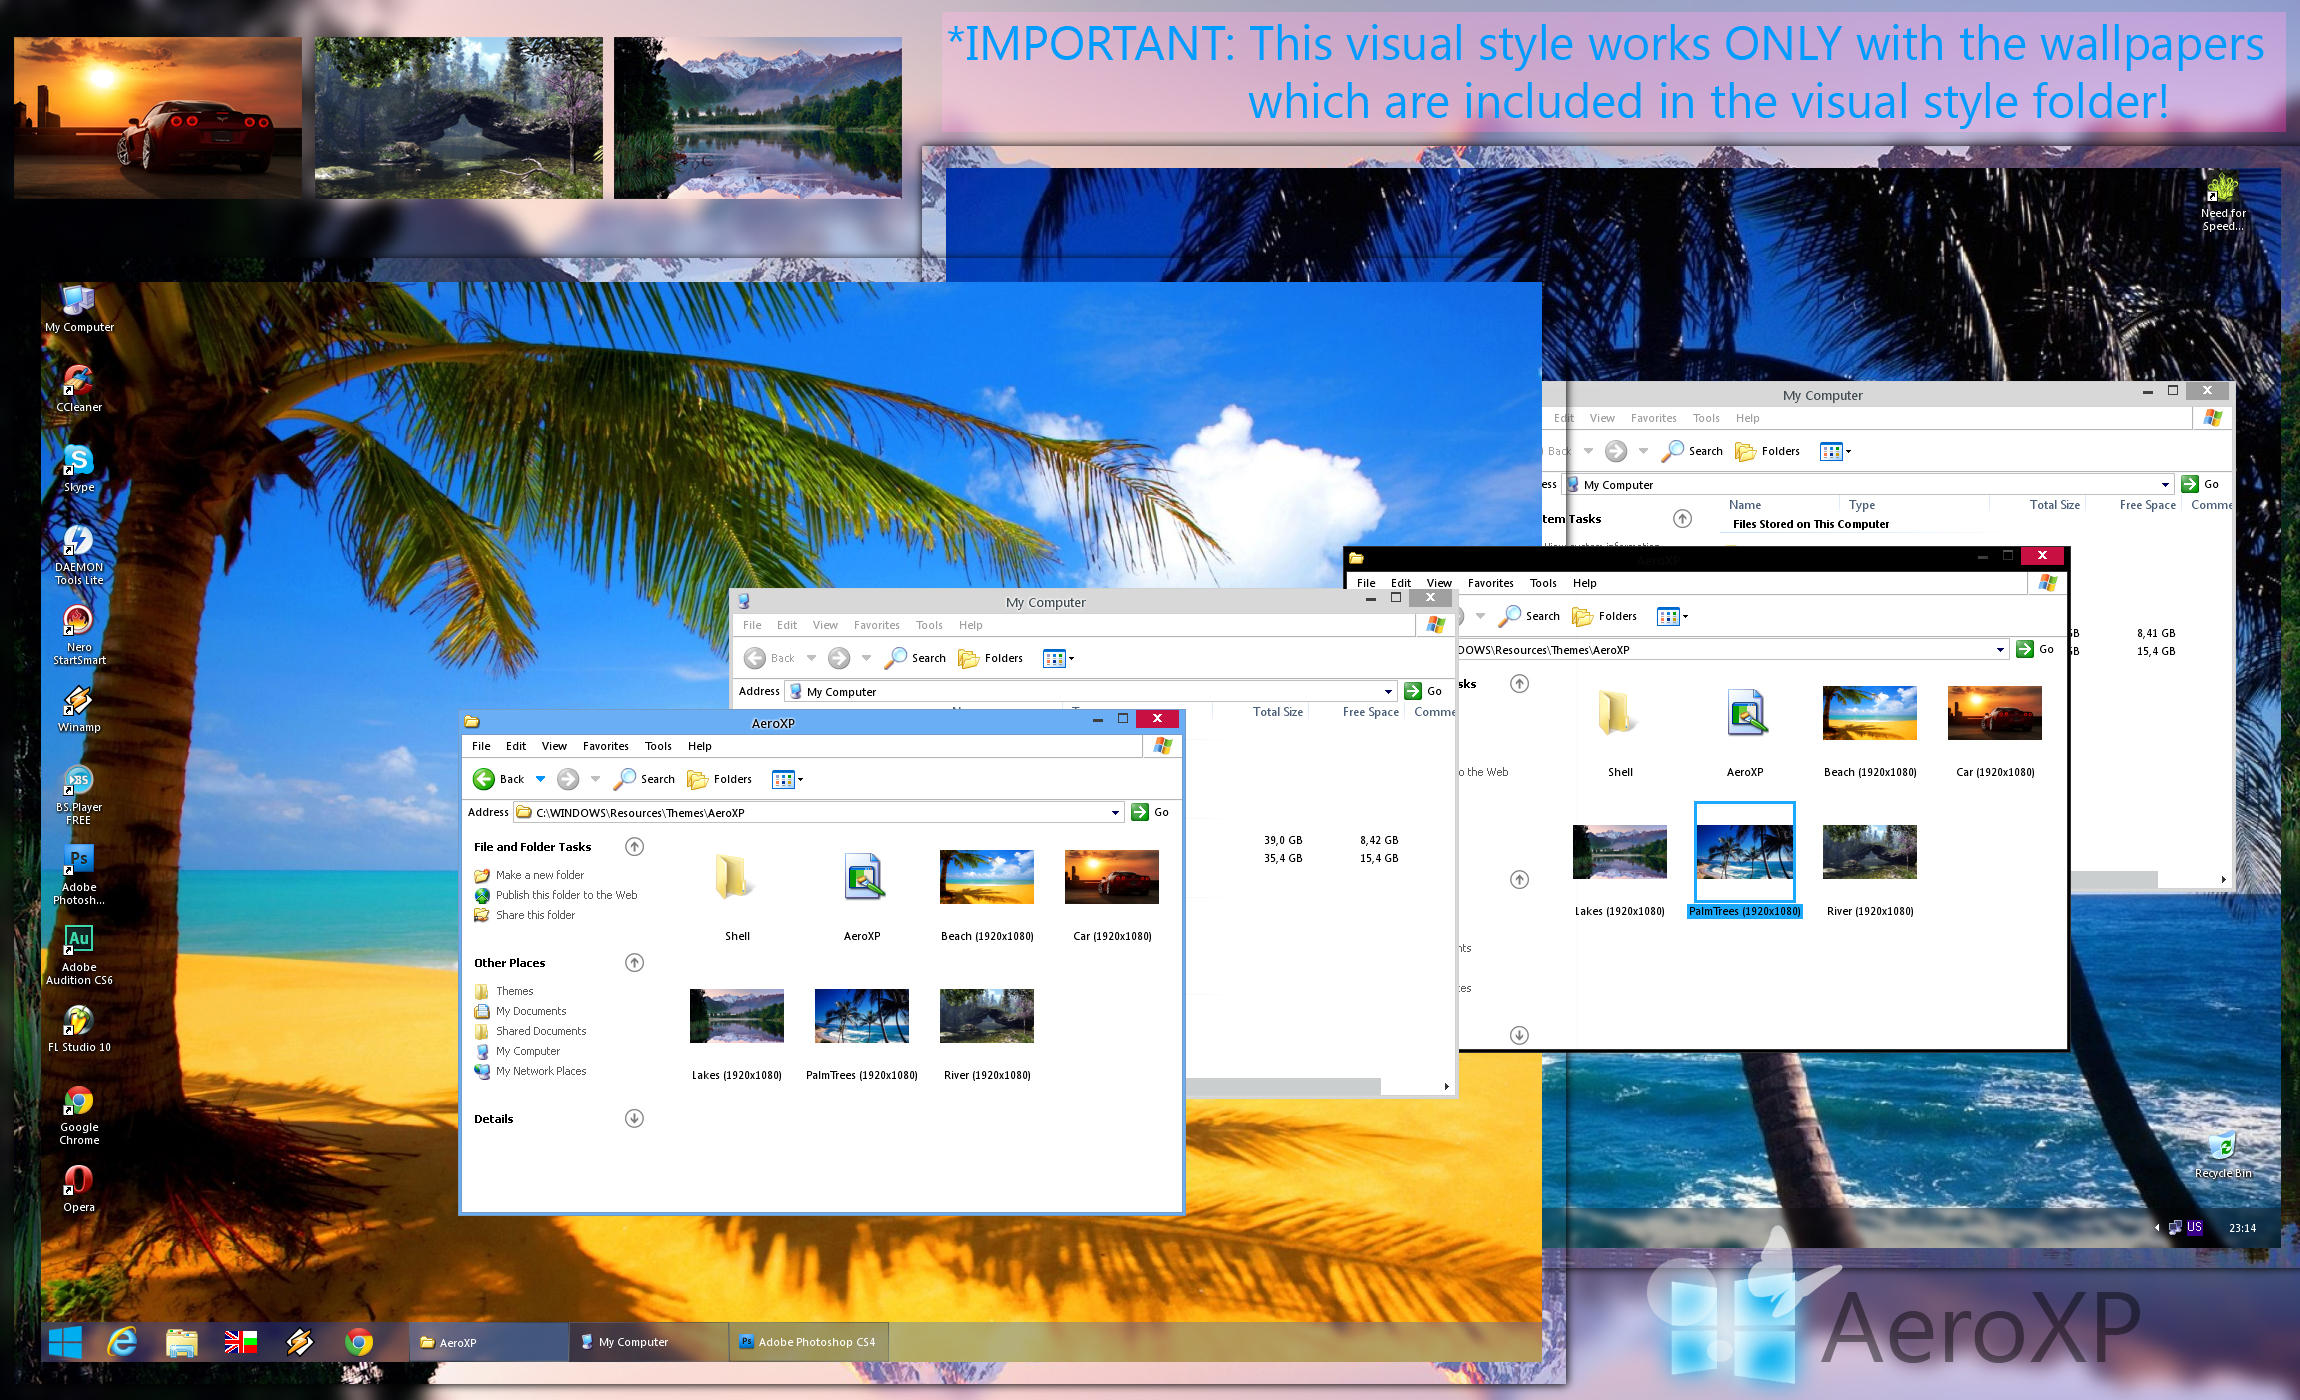 Windows 8 Themes For Xp Sp3